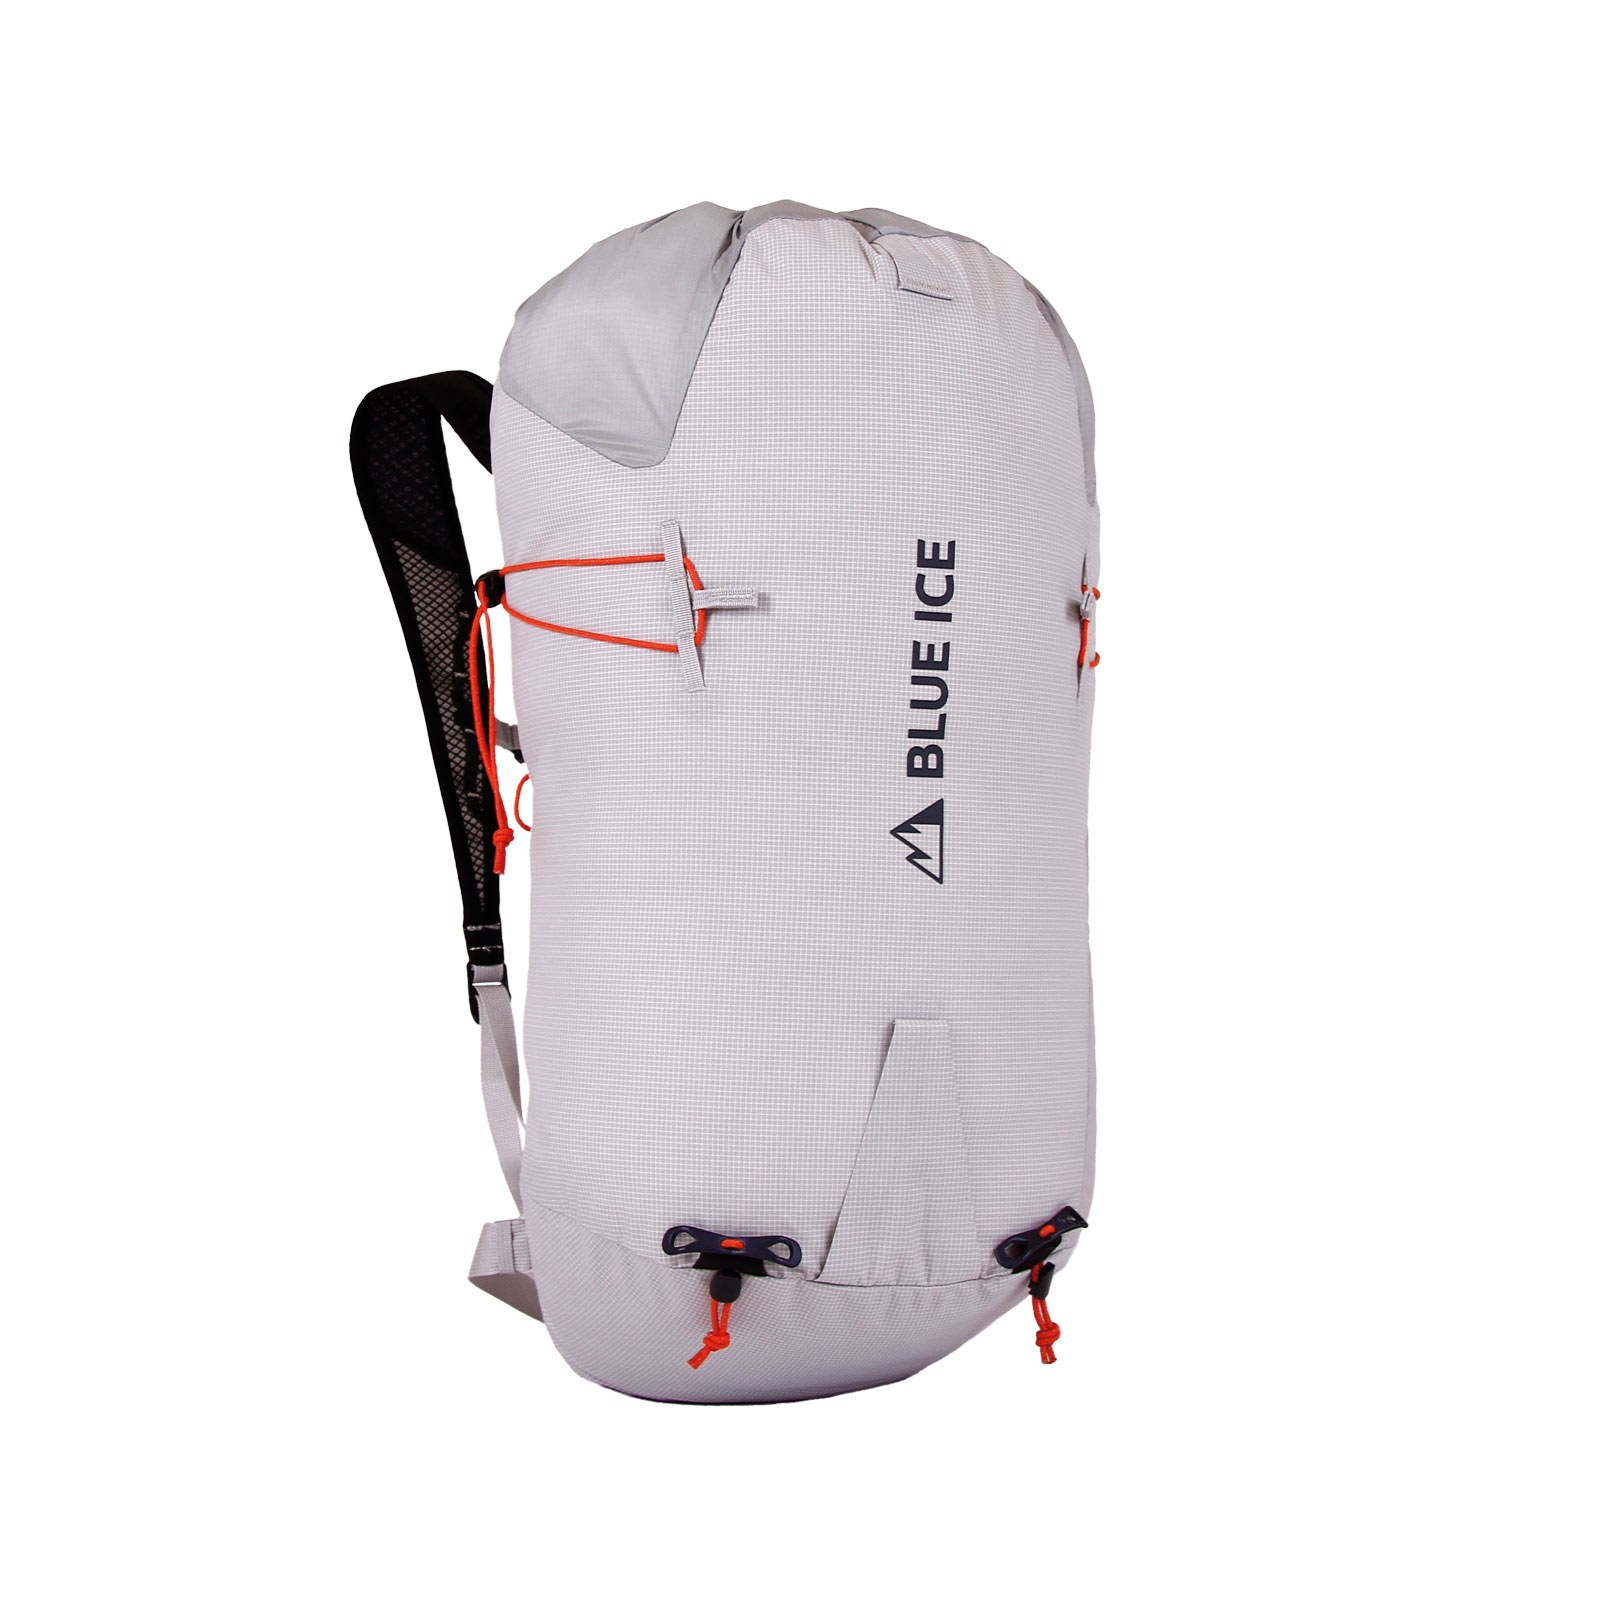 40L Backpack for Ski Mountaineering and Skiing - KUME – Blue Ice CH